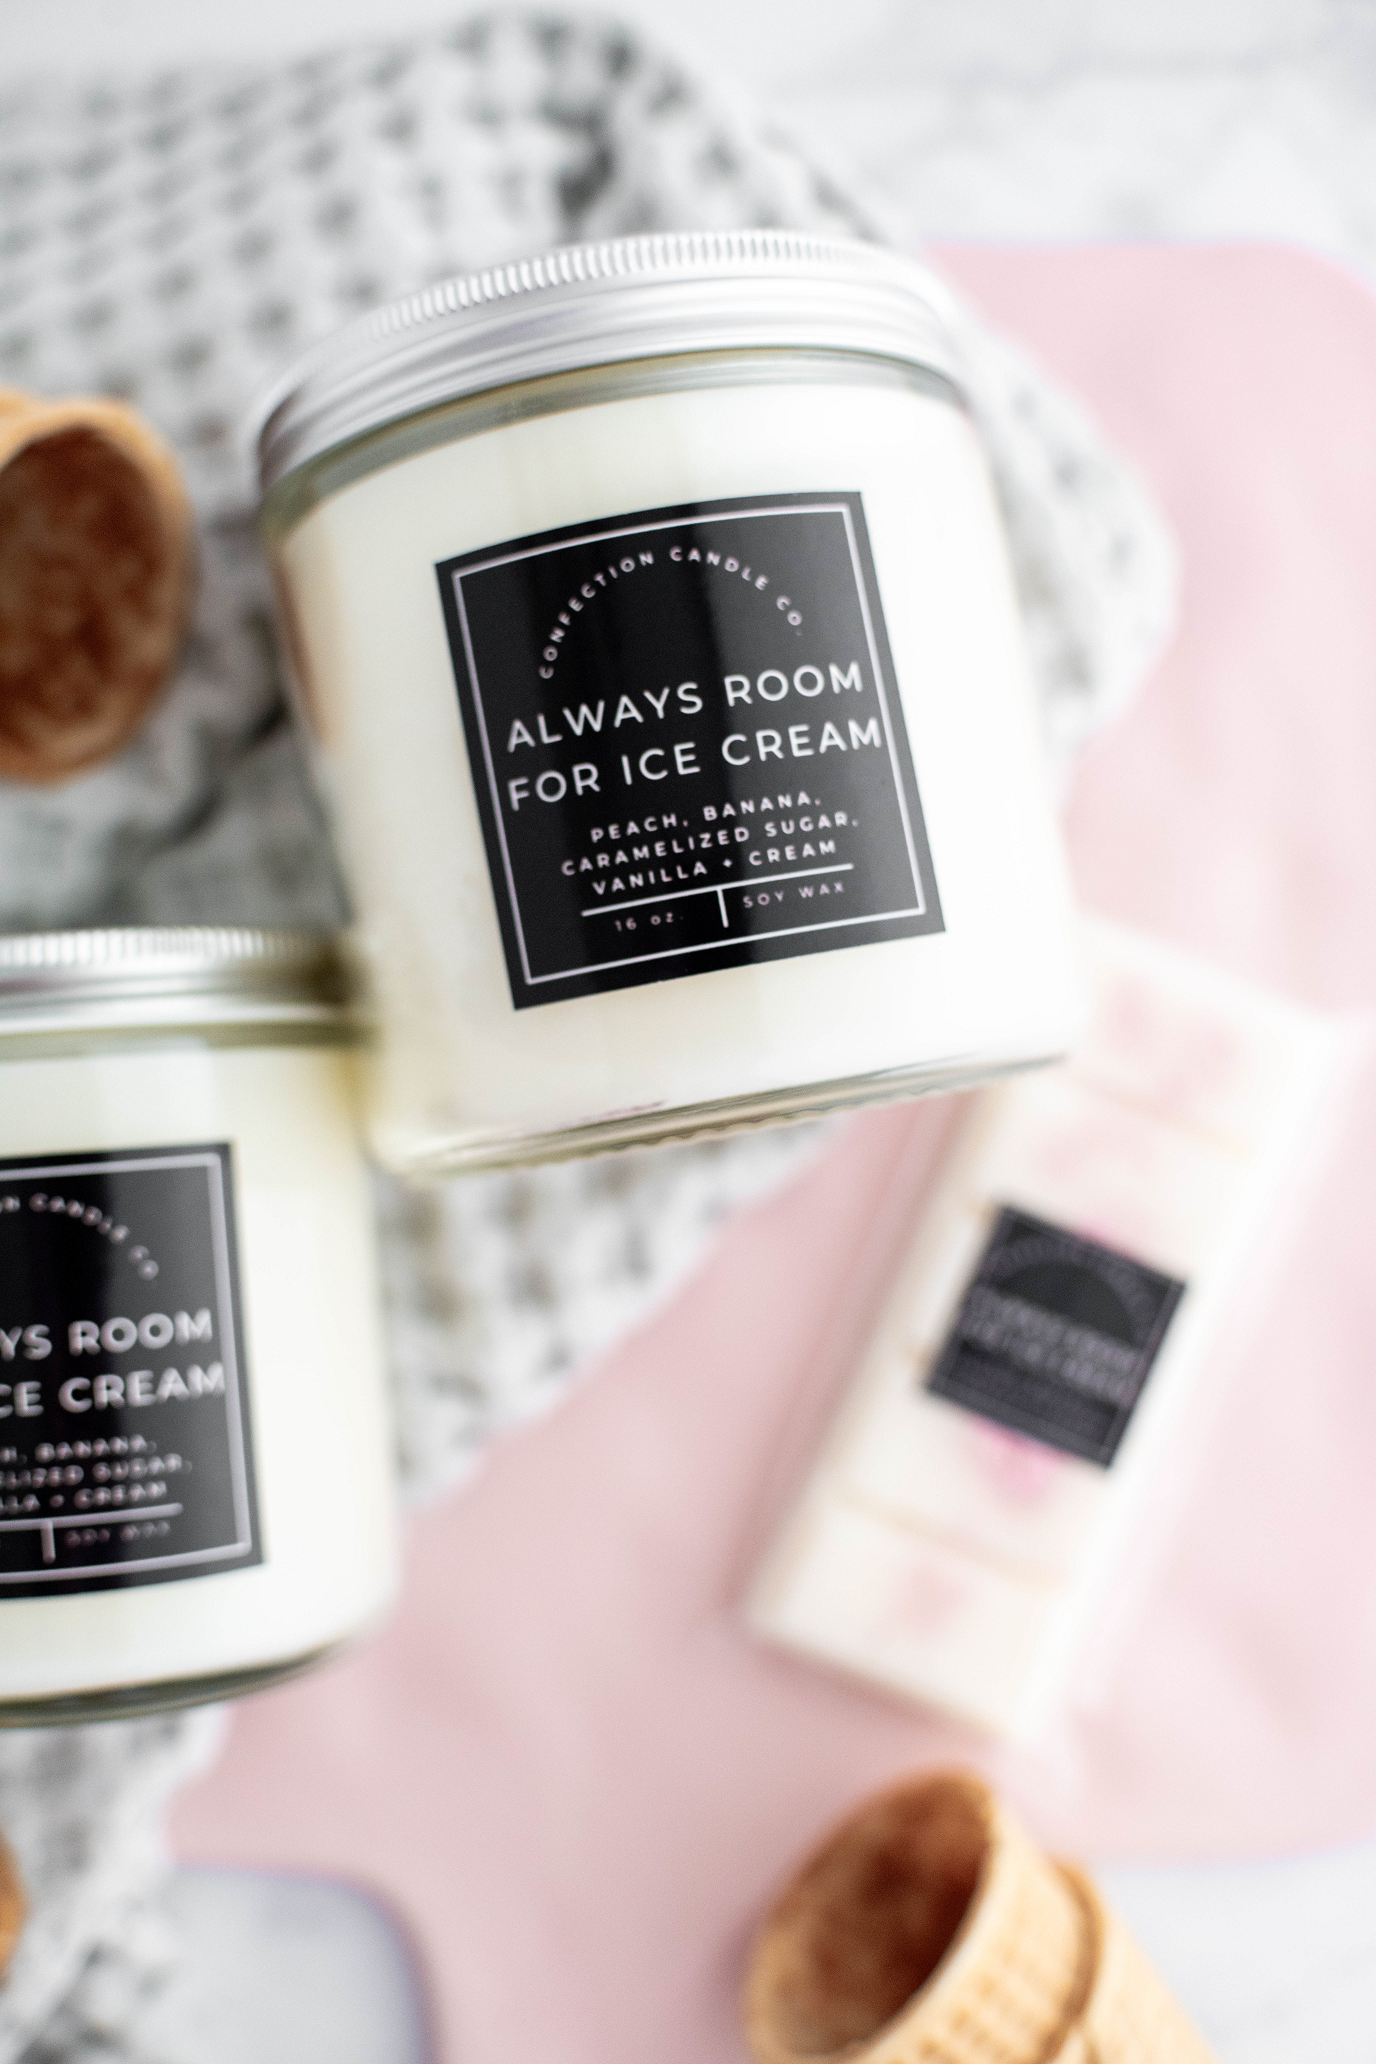 Always Room for Ice Cream Candles + Wax Melts